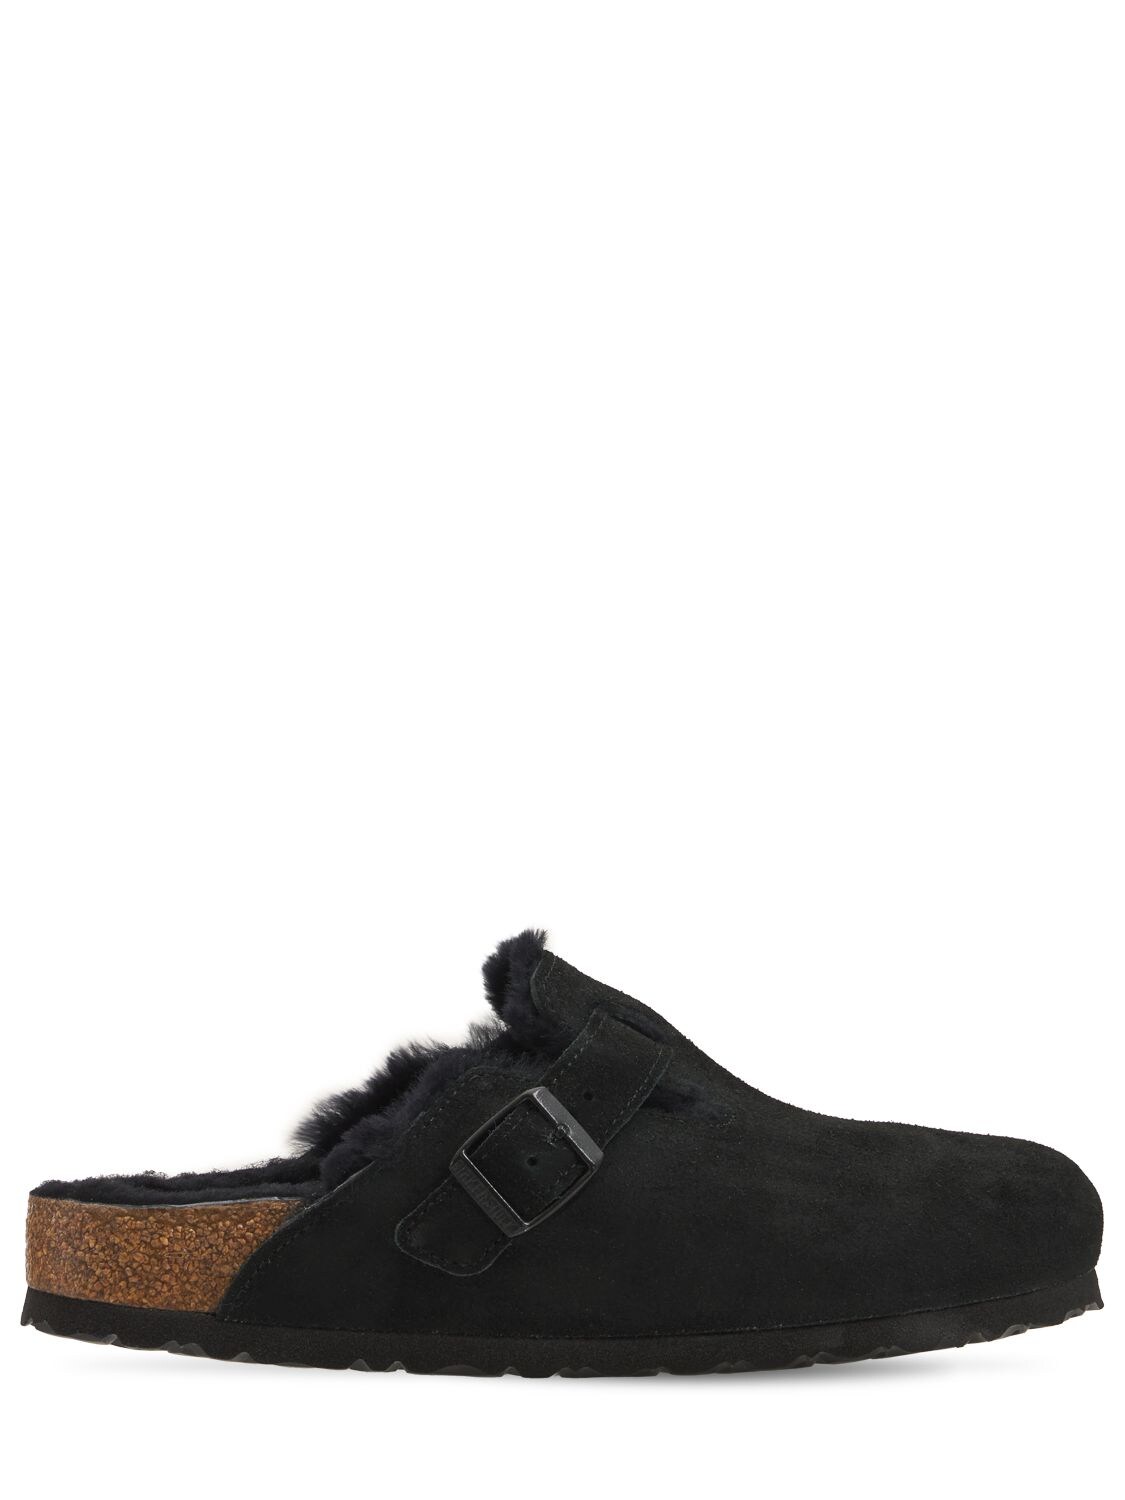 Boston Shearling & Suede Leather Loafers